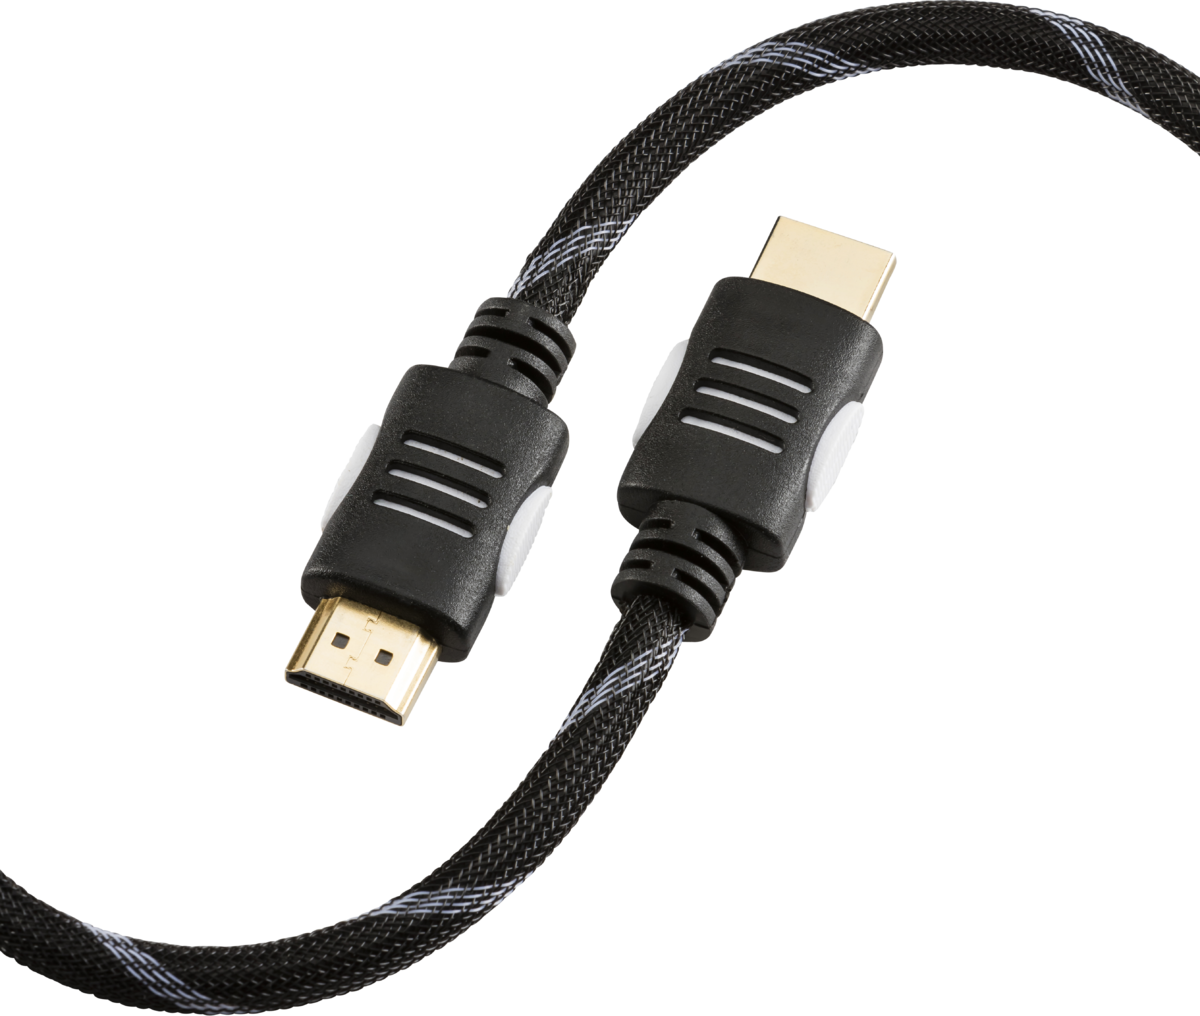 5m 4K High Speed HDMI Cable